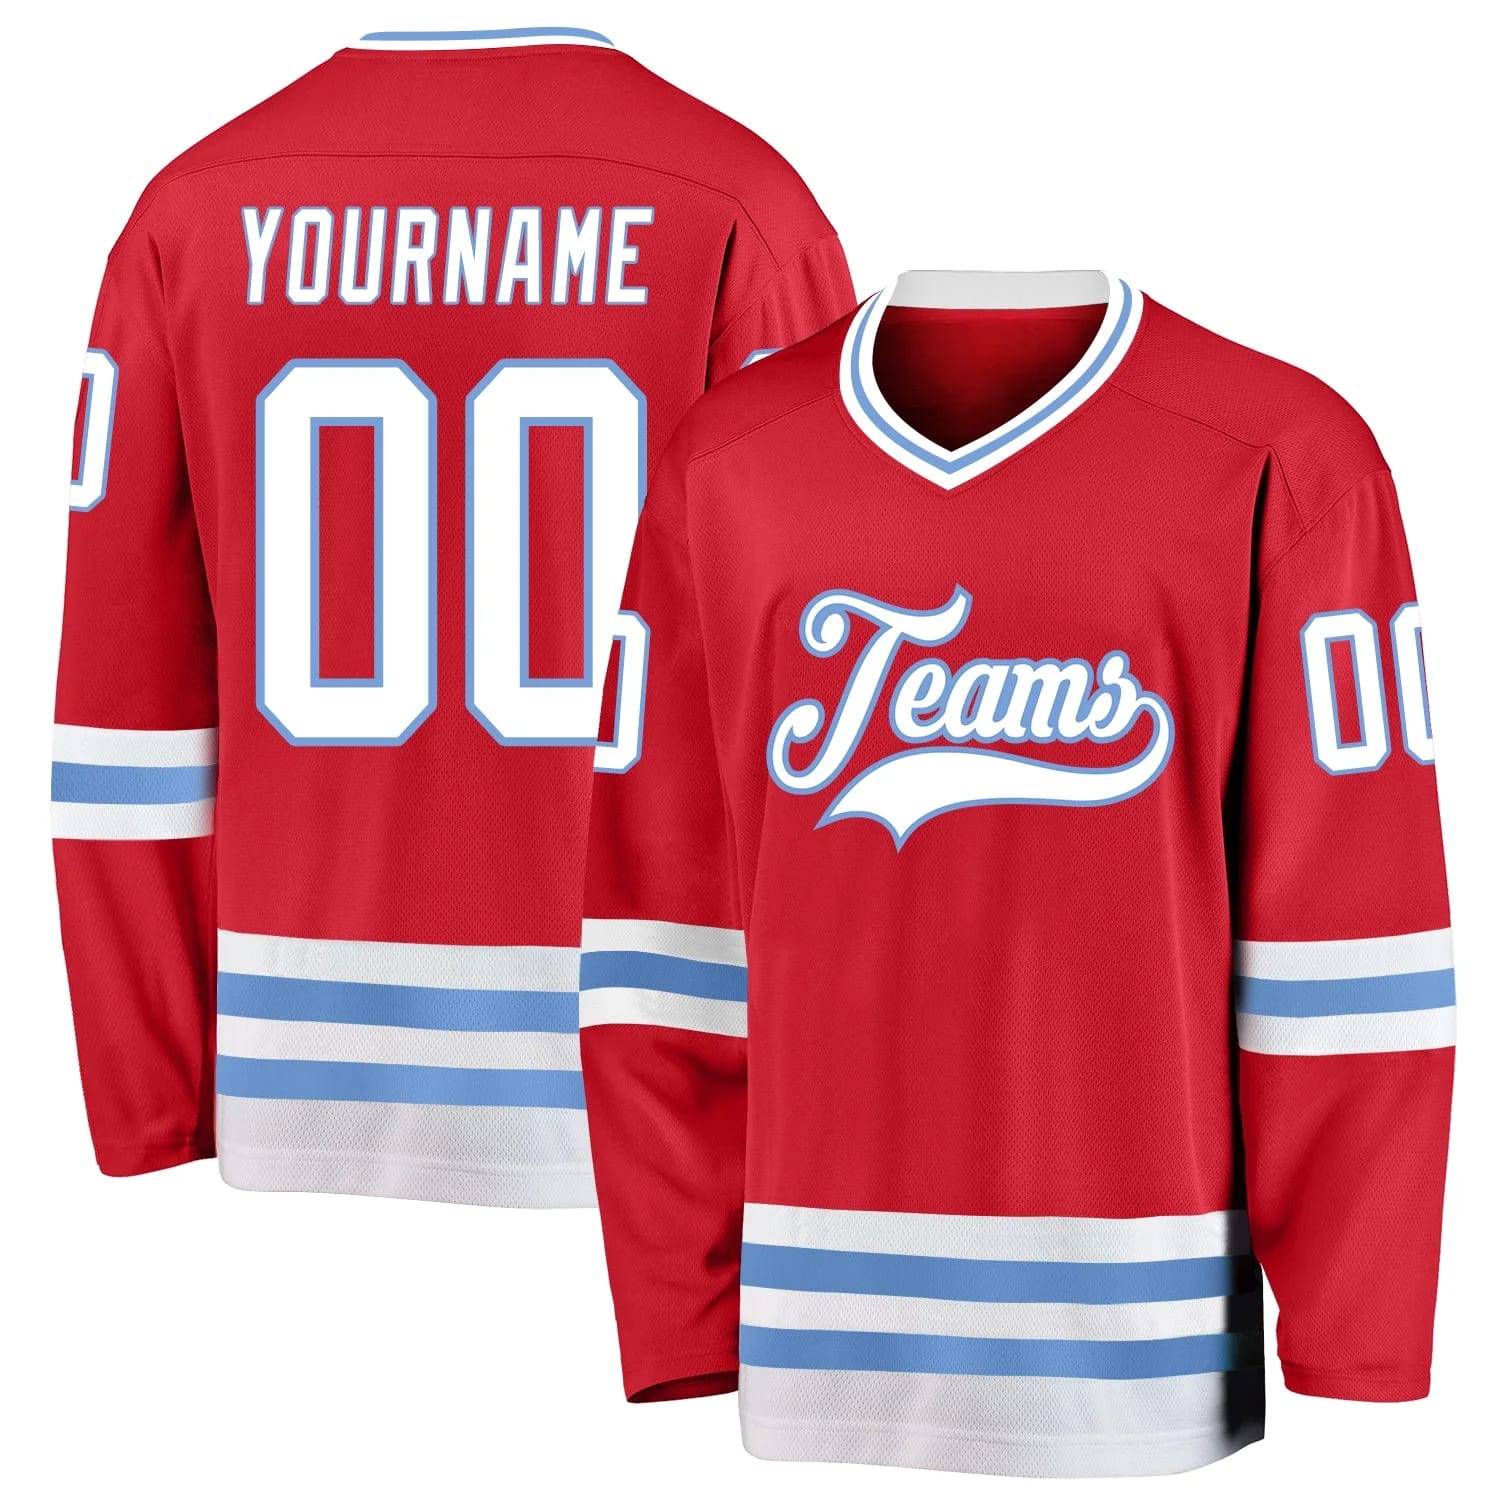 Stitched And Print Red White-light Blue Hockey Jersey Custom